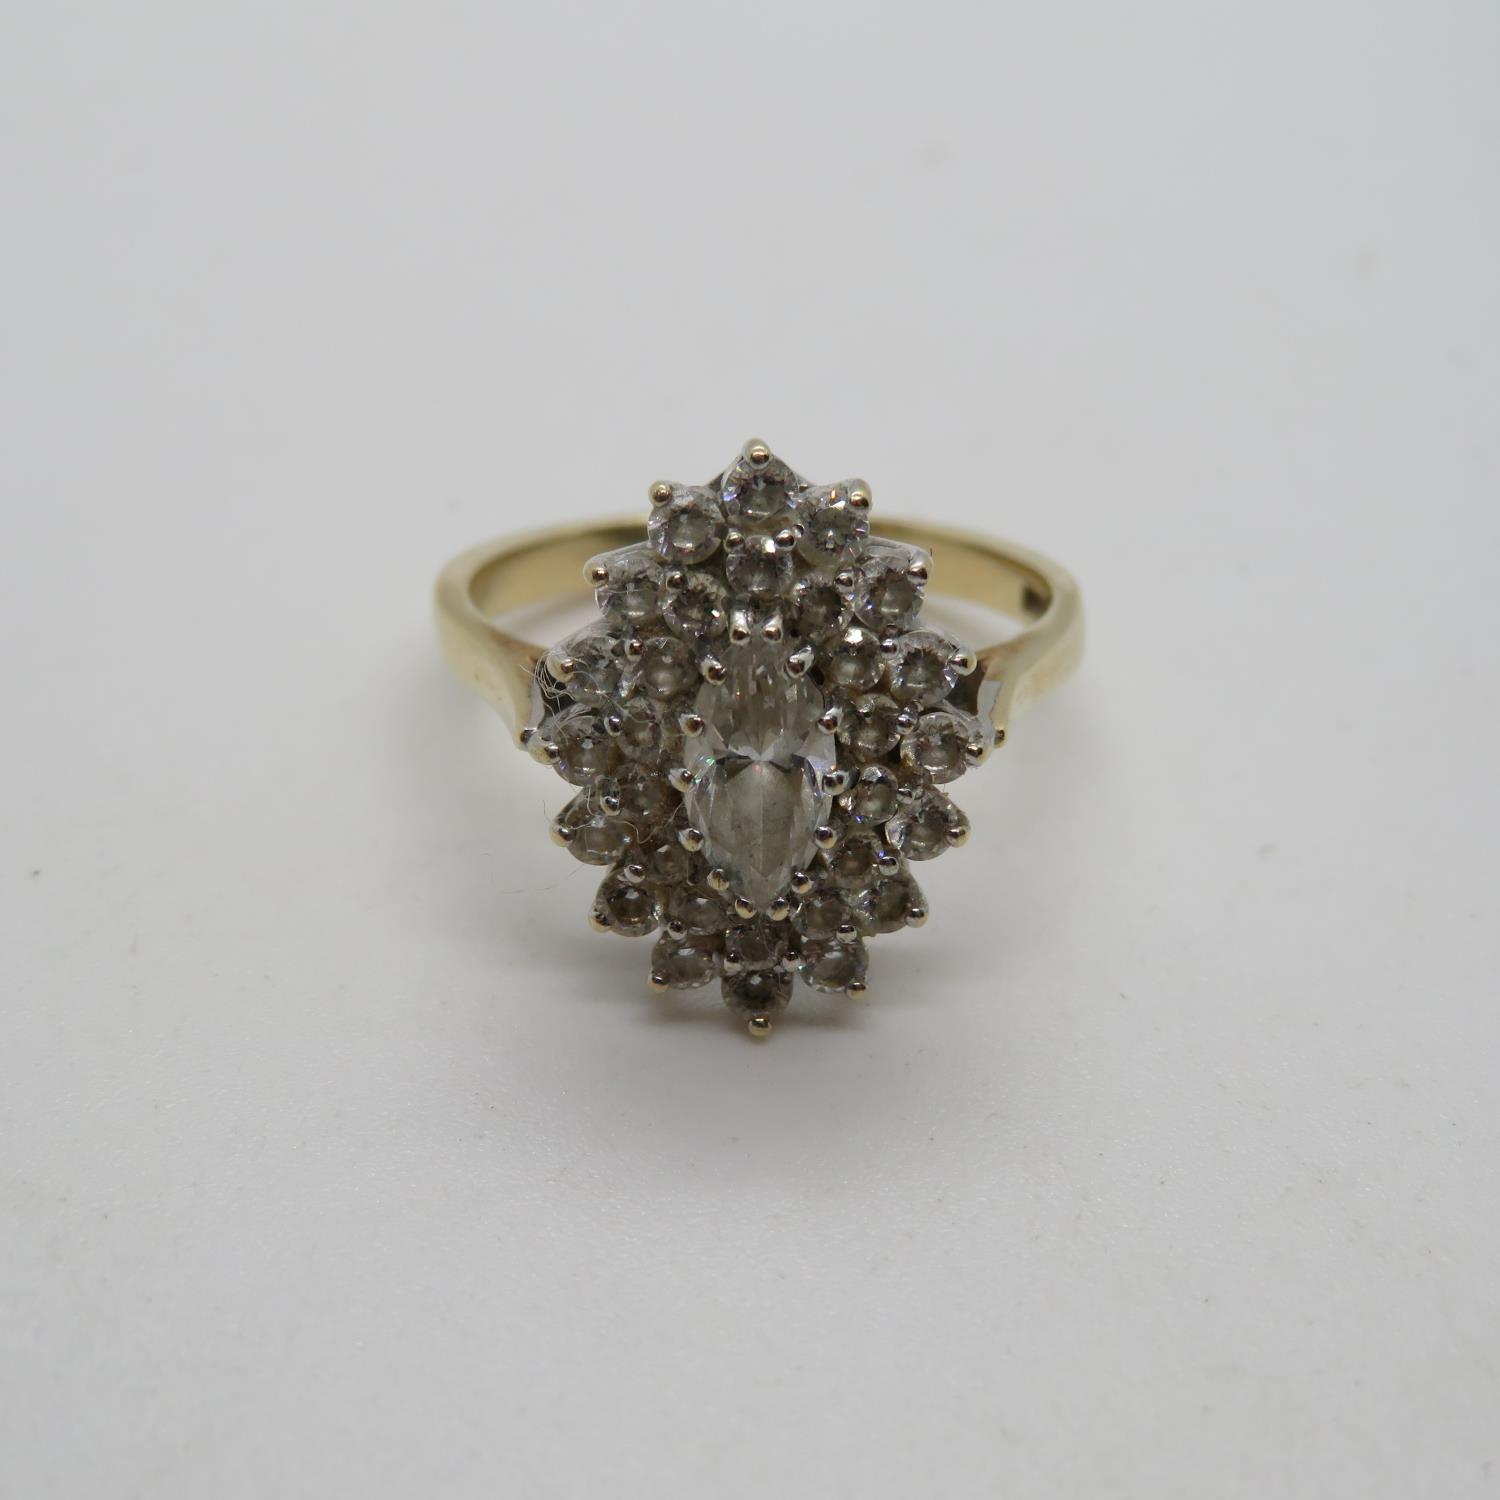 4g size P gold and CZ ring - Image 2 of 3